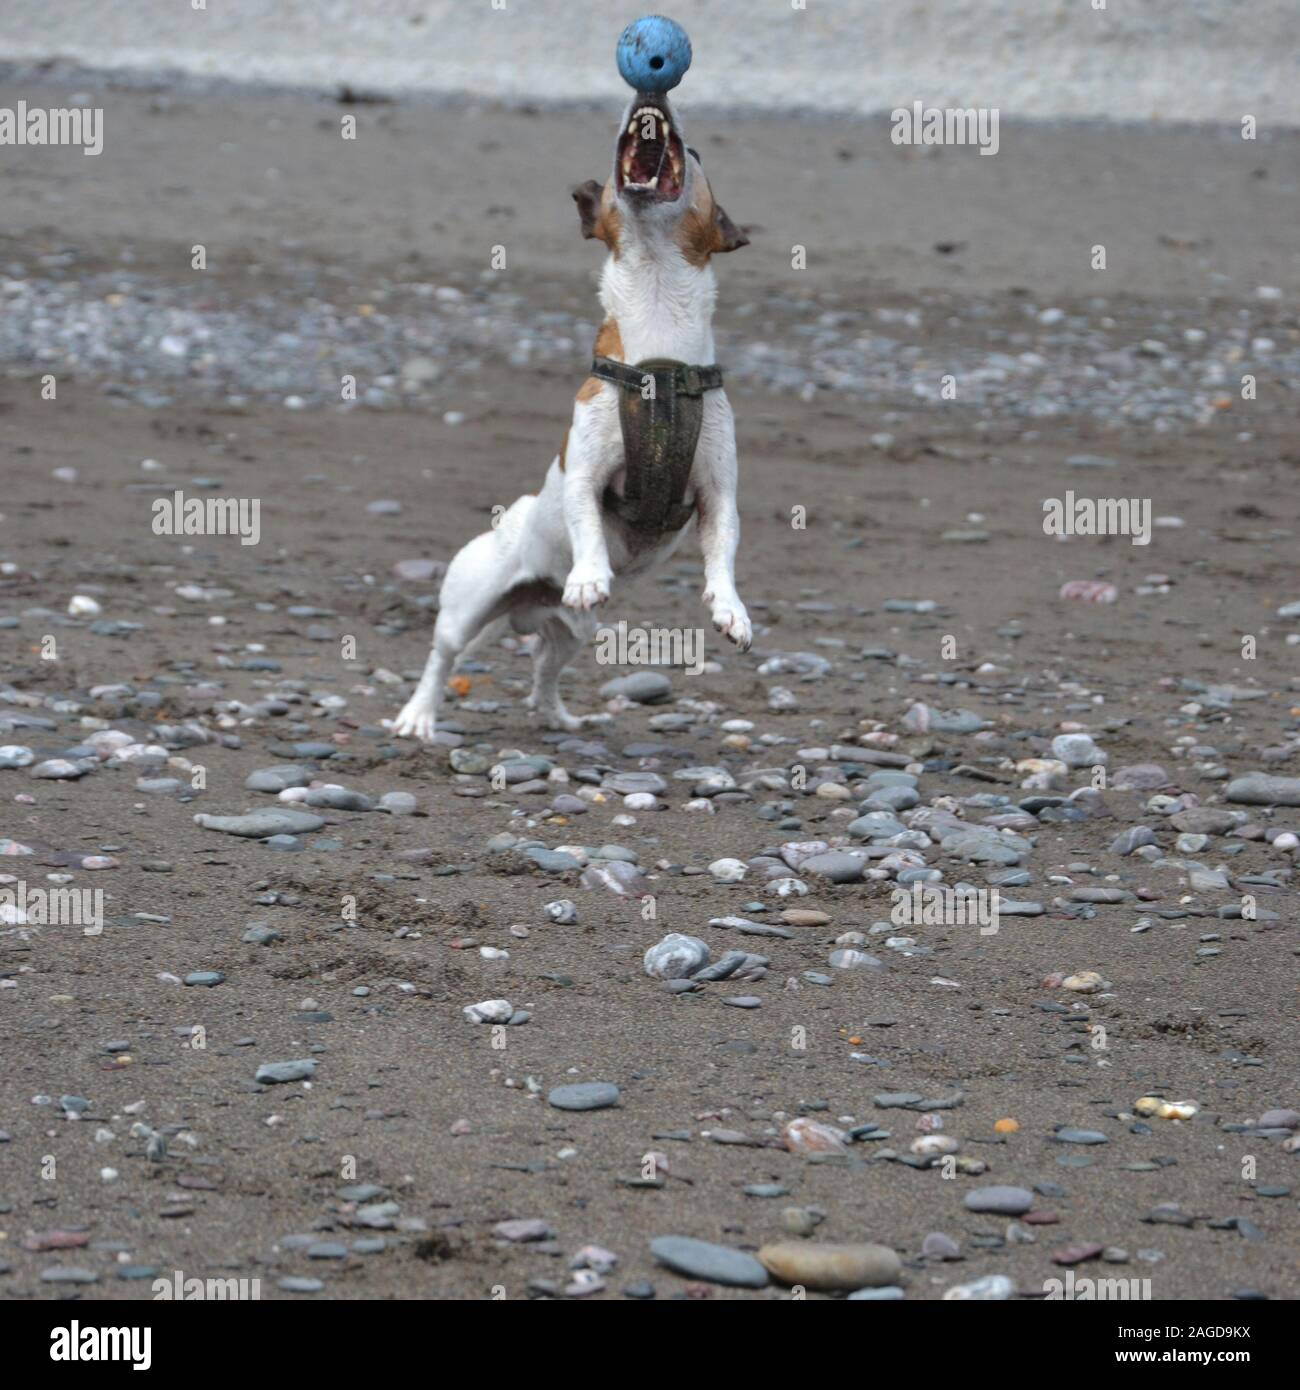 A white and tan Jack Russell terrier dog leaps in the air with his mouth wide open, to grab a blue ball on a beach. All his teeth are visible, his paw Stock Photo